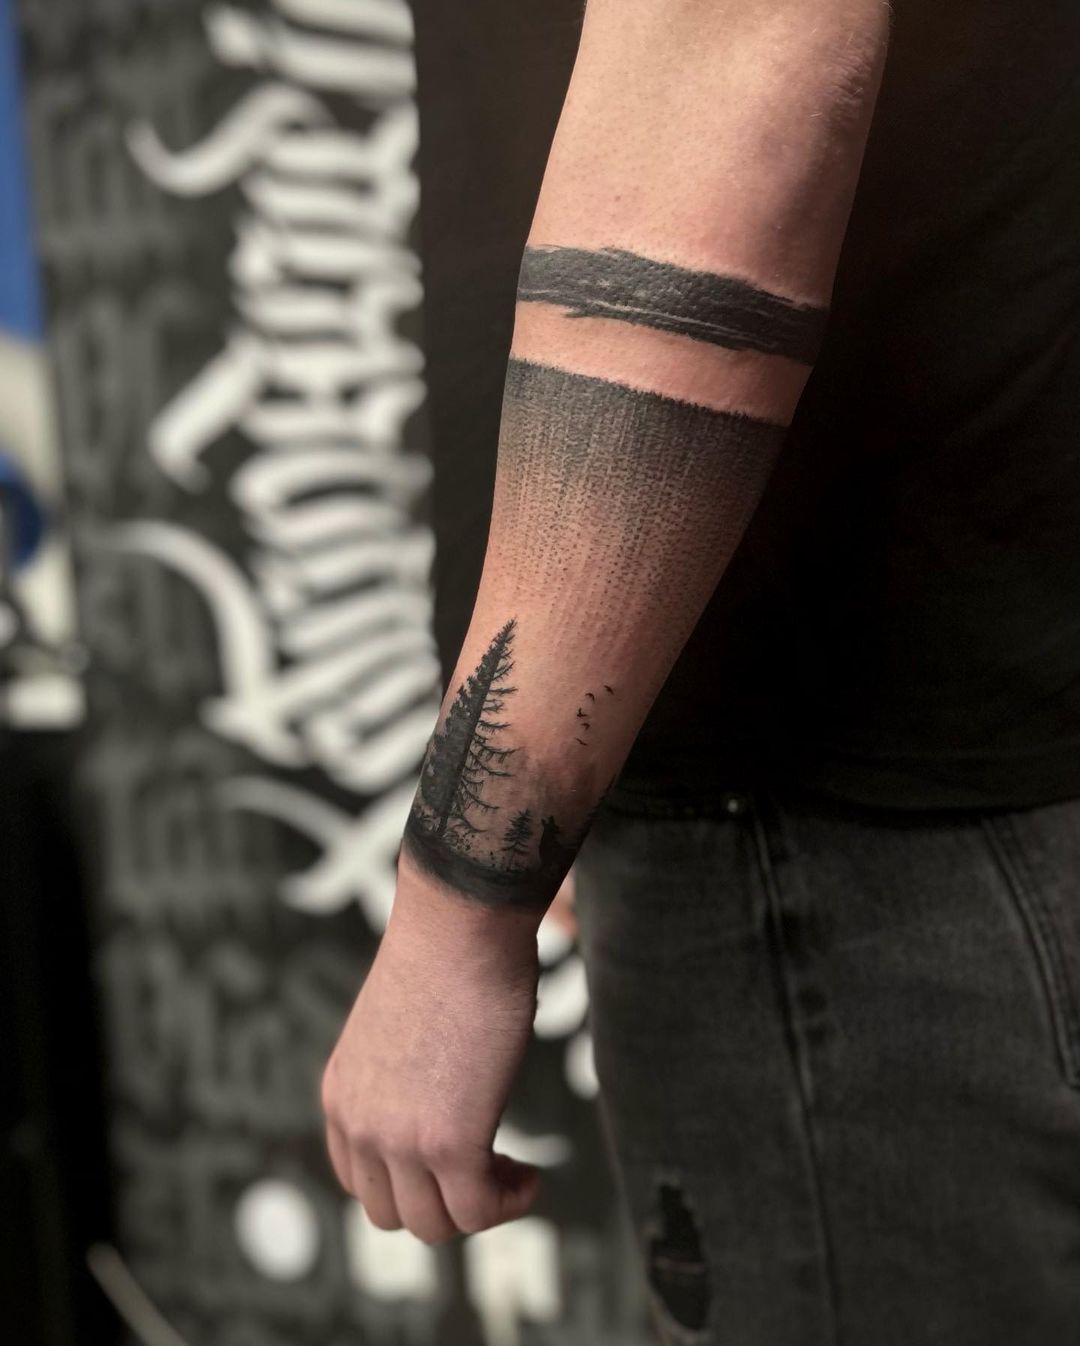 band-forest-tattoo-subject-ink